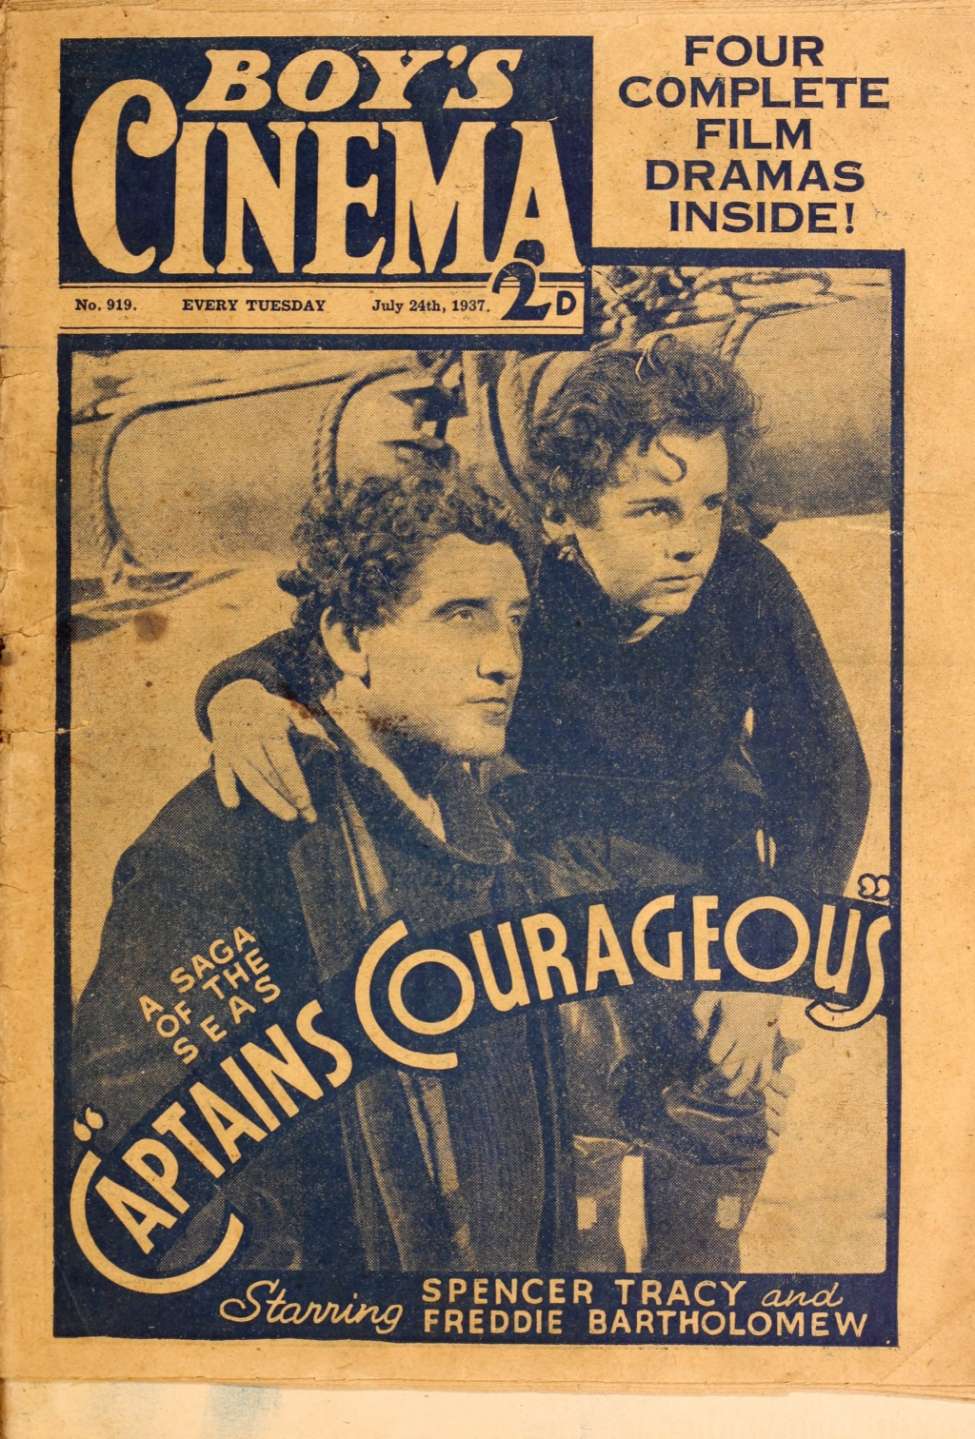 Comic Book Cover For Boy's Cinema 919 - Captains Courageous - Spencer Tracy